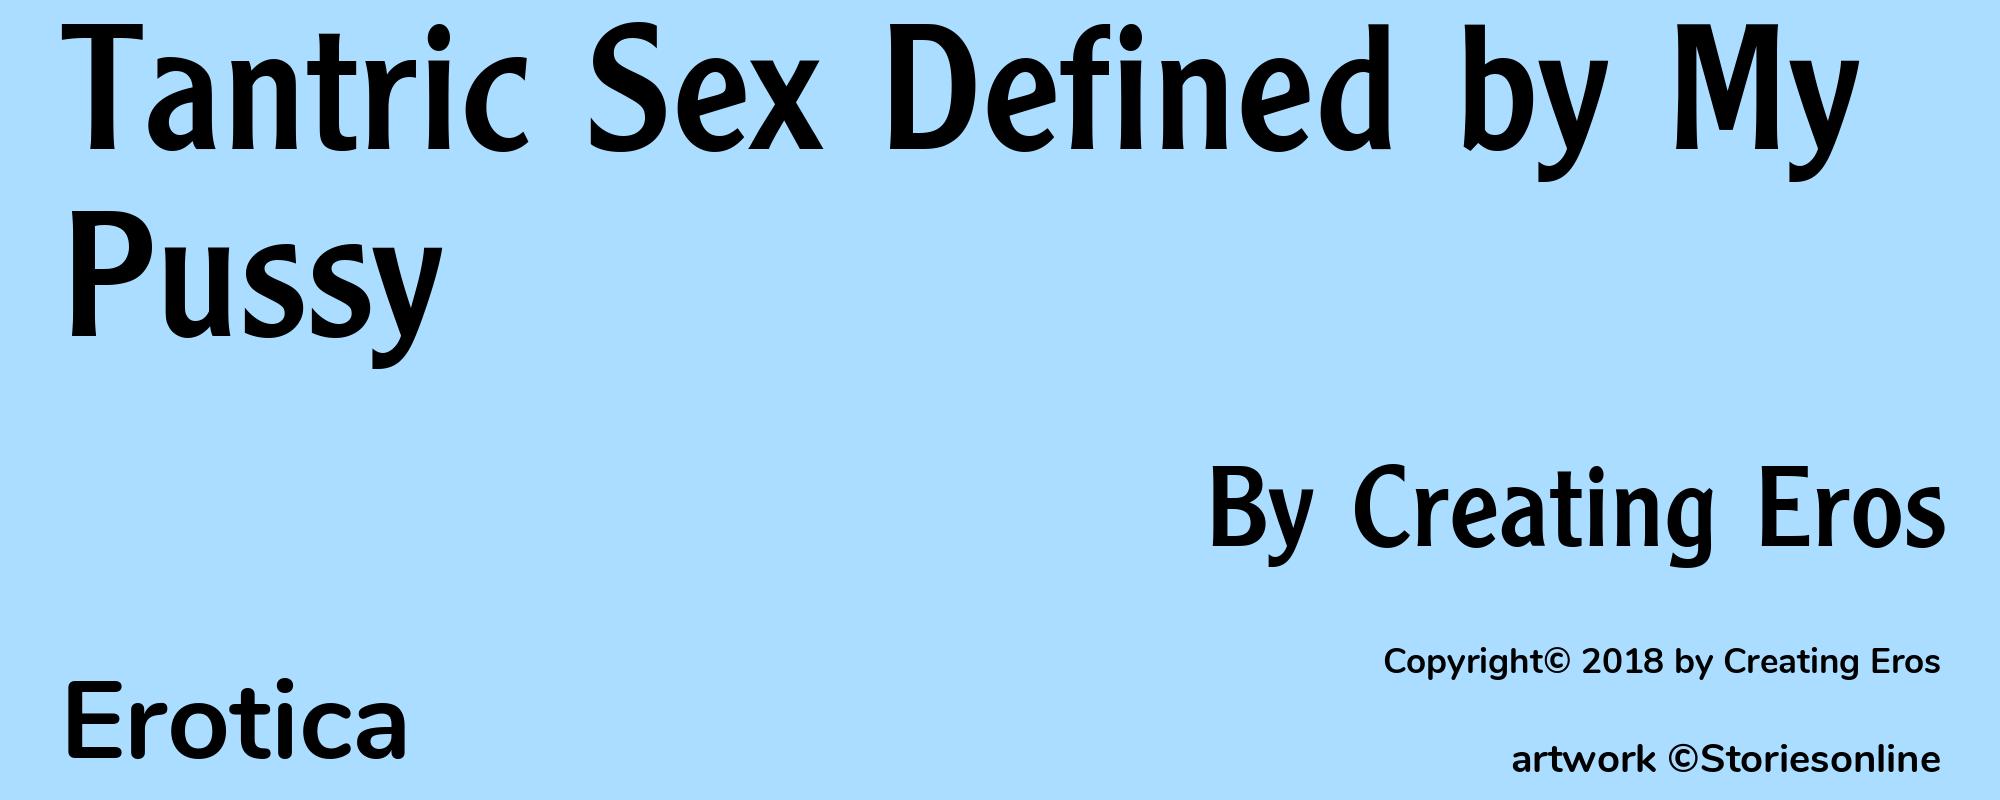 Tantric Sex Defined by My Pussy - Cover